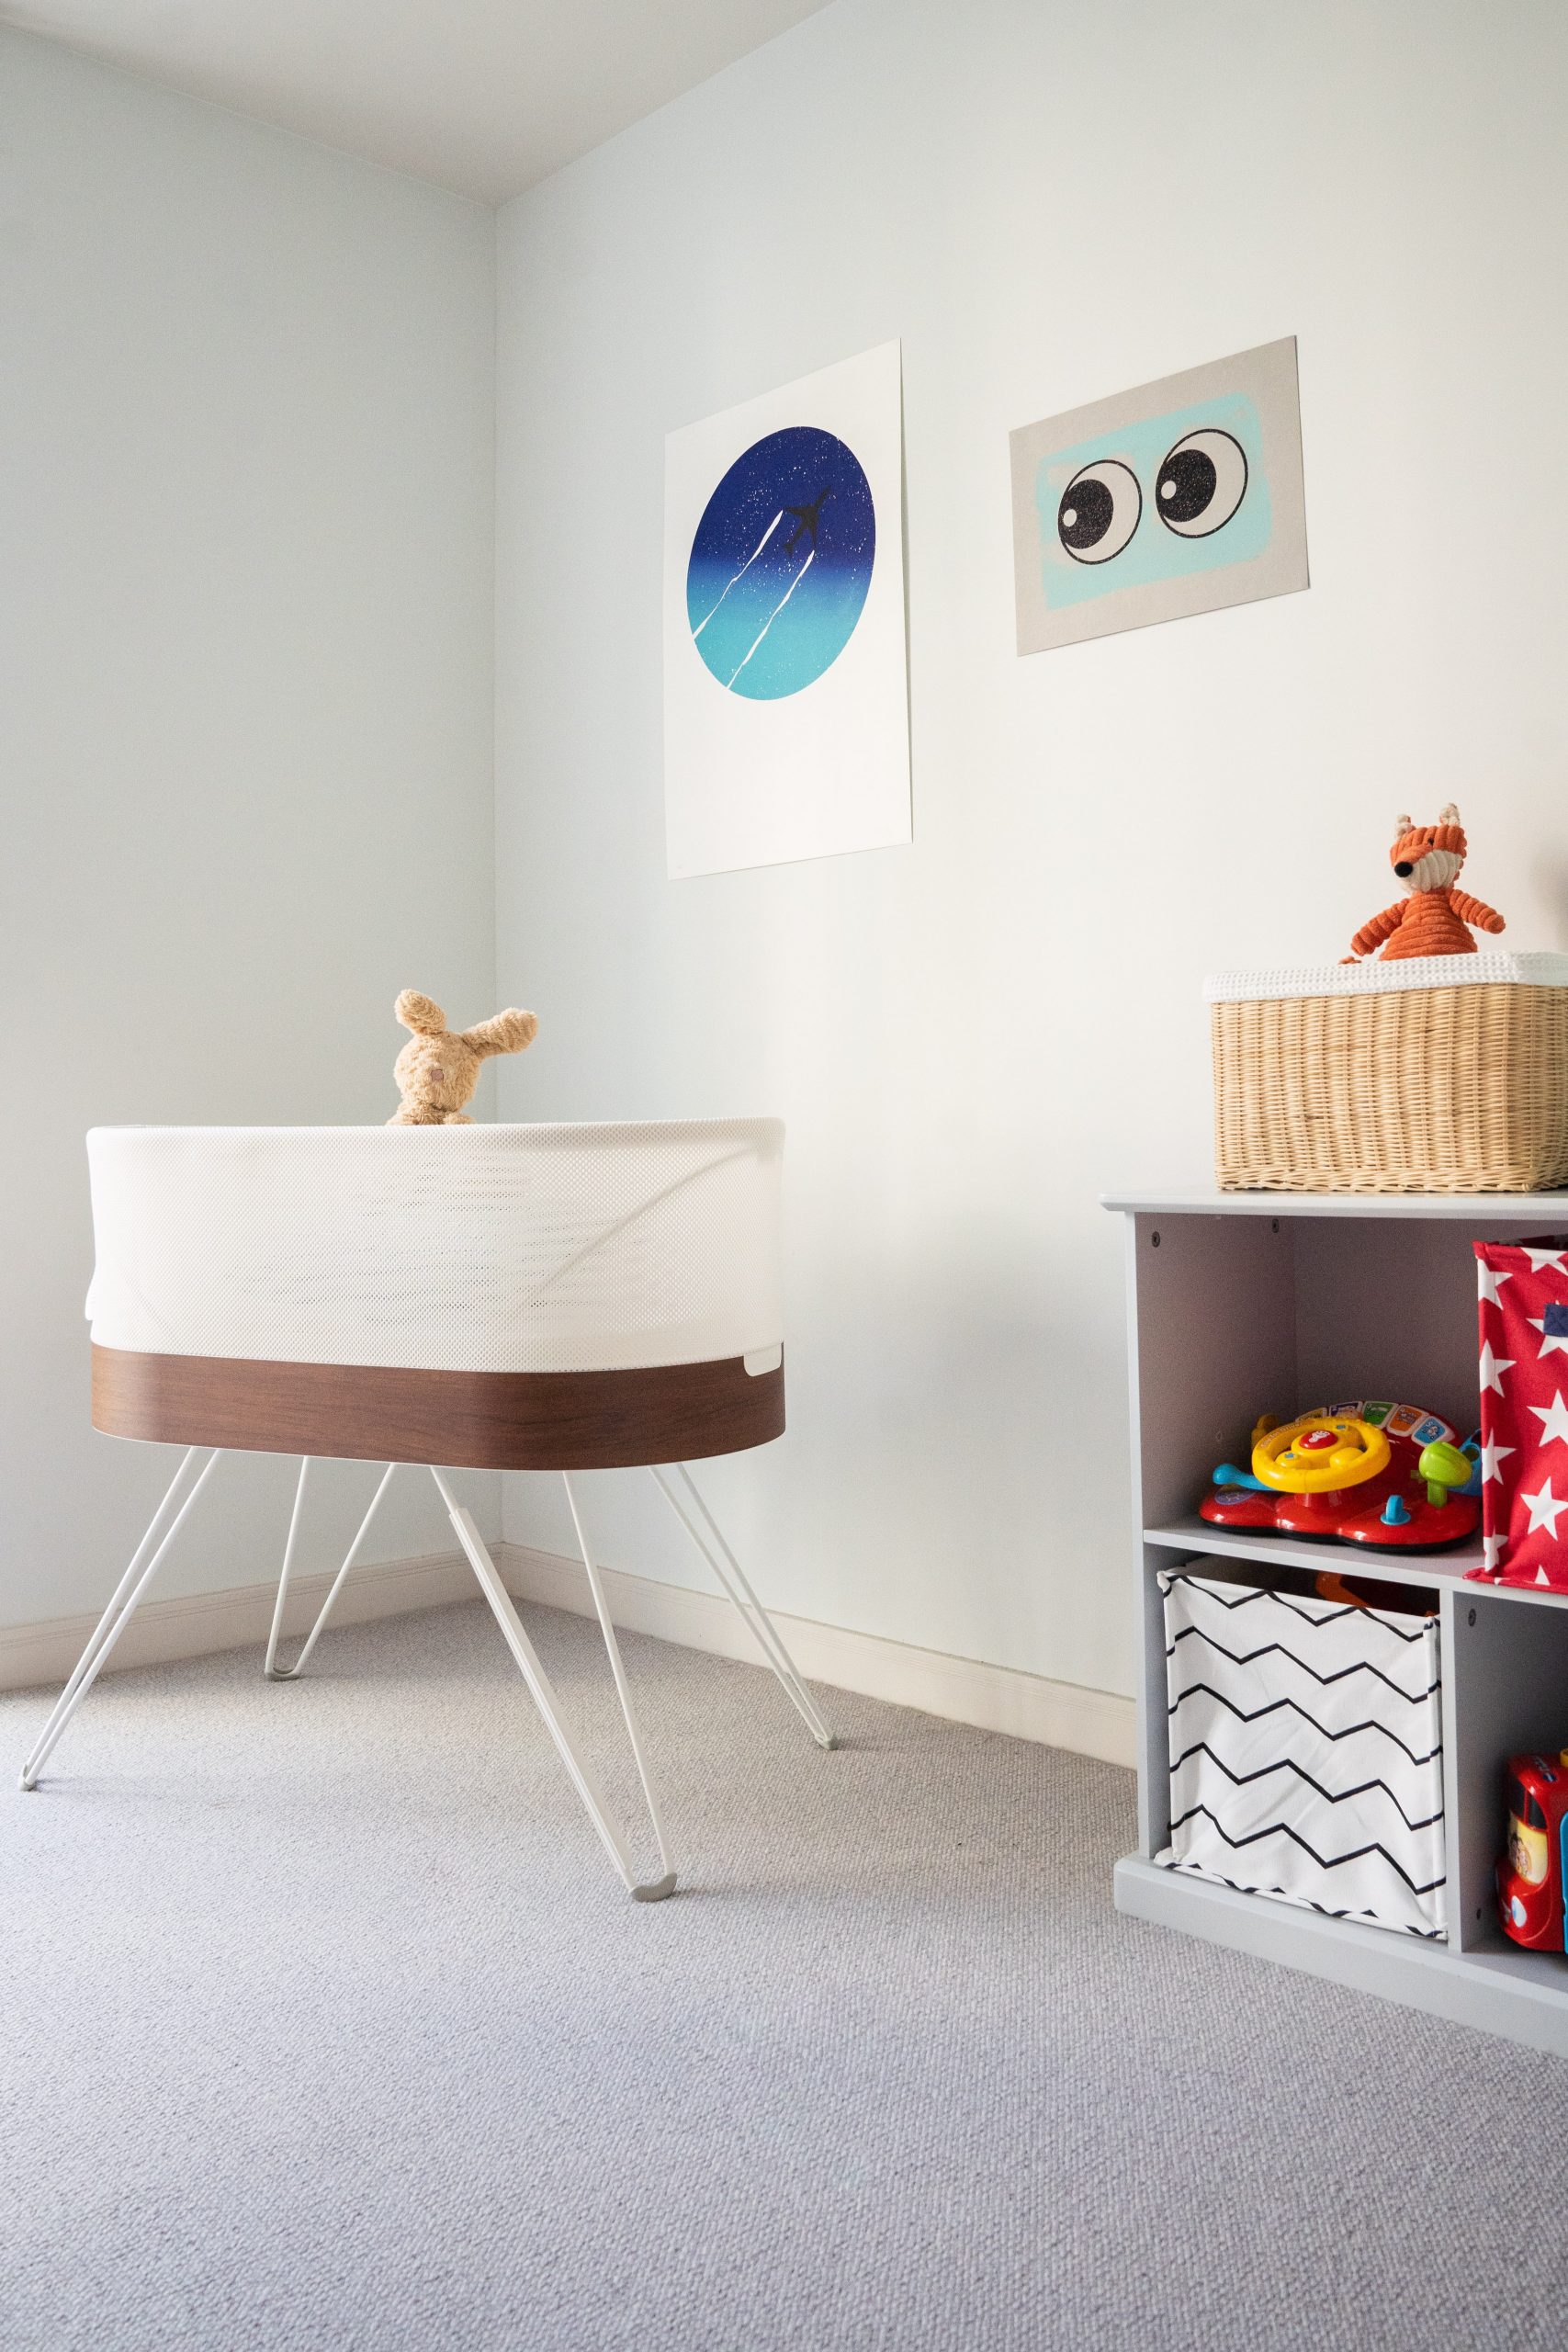 Planning a Great Kid’s Room